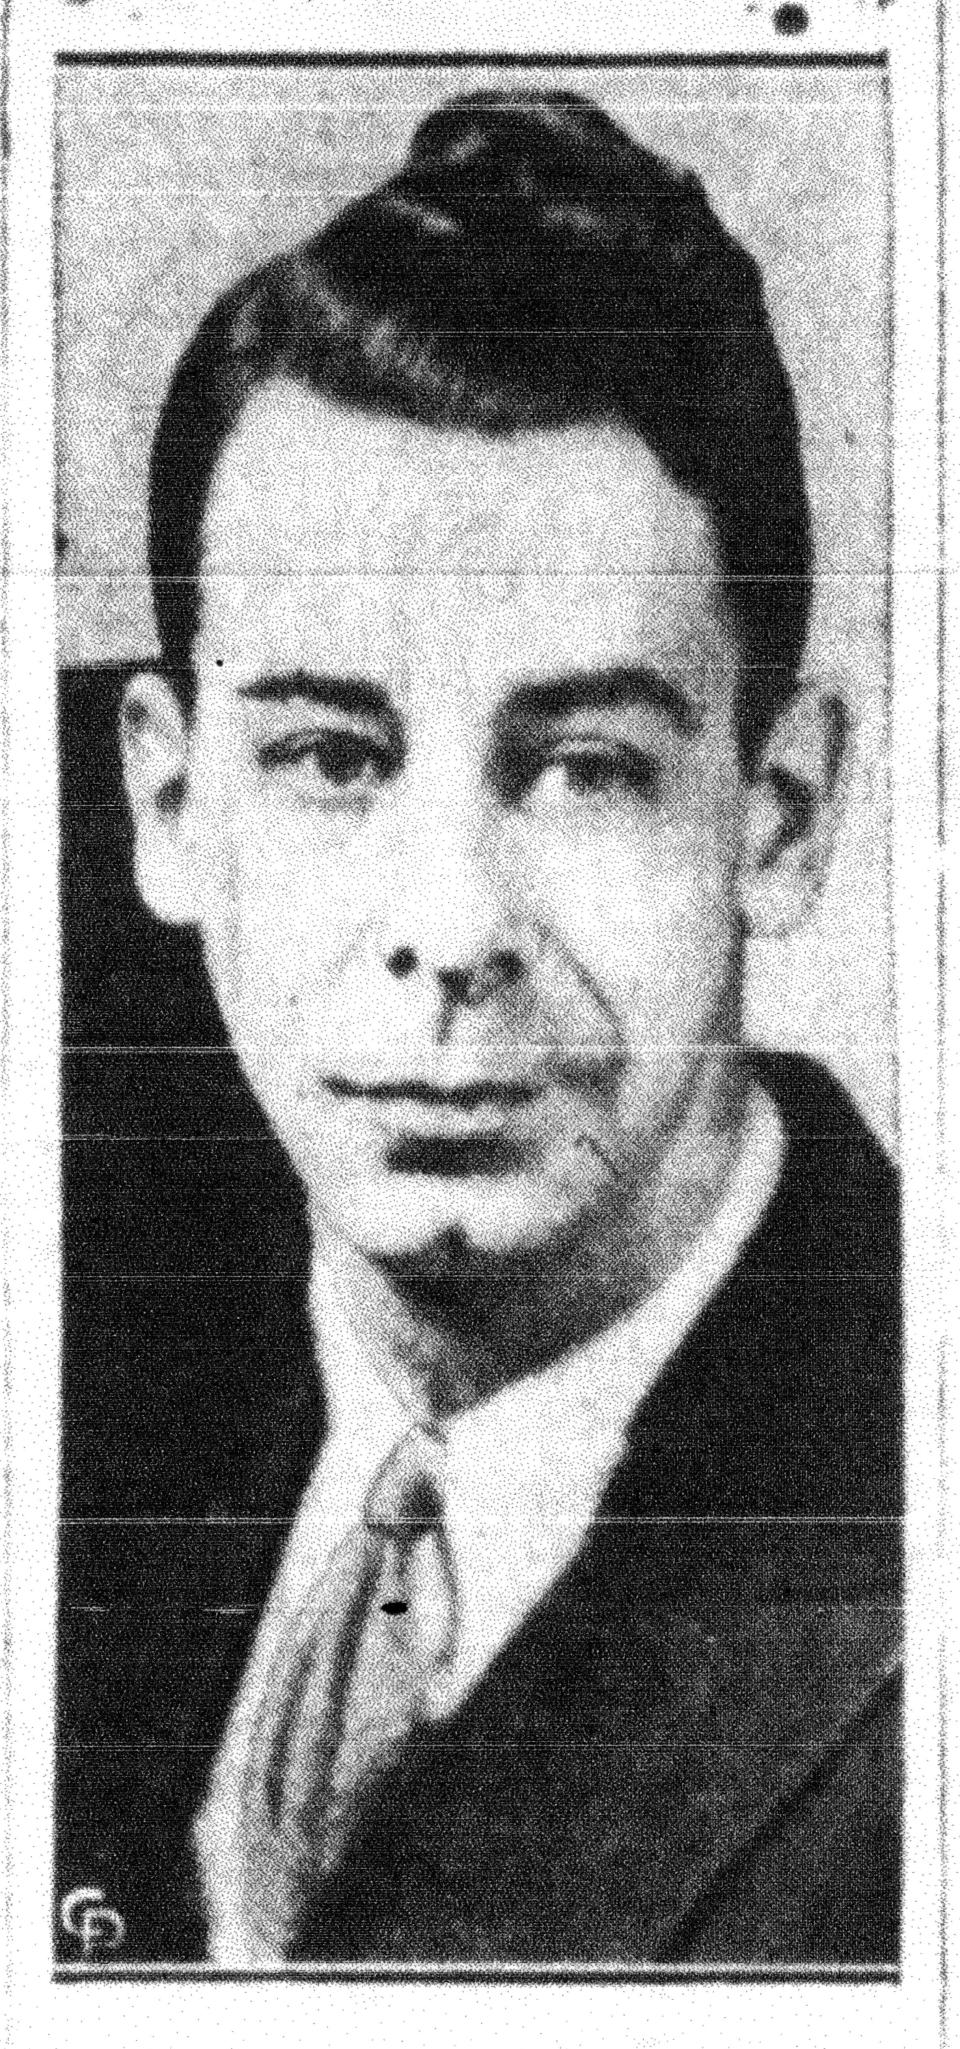 This photo of Editor Edward J. Mowery (1906-1970) appeared in theE-G Nov. 19, 1936, a special issue celebrating the 131st anniversary of Lancaster.